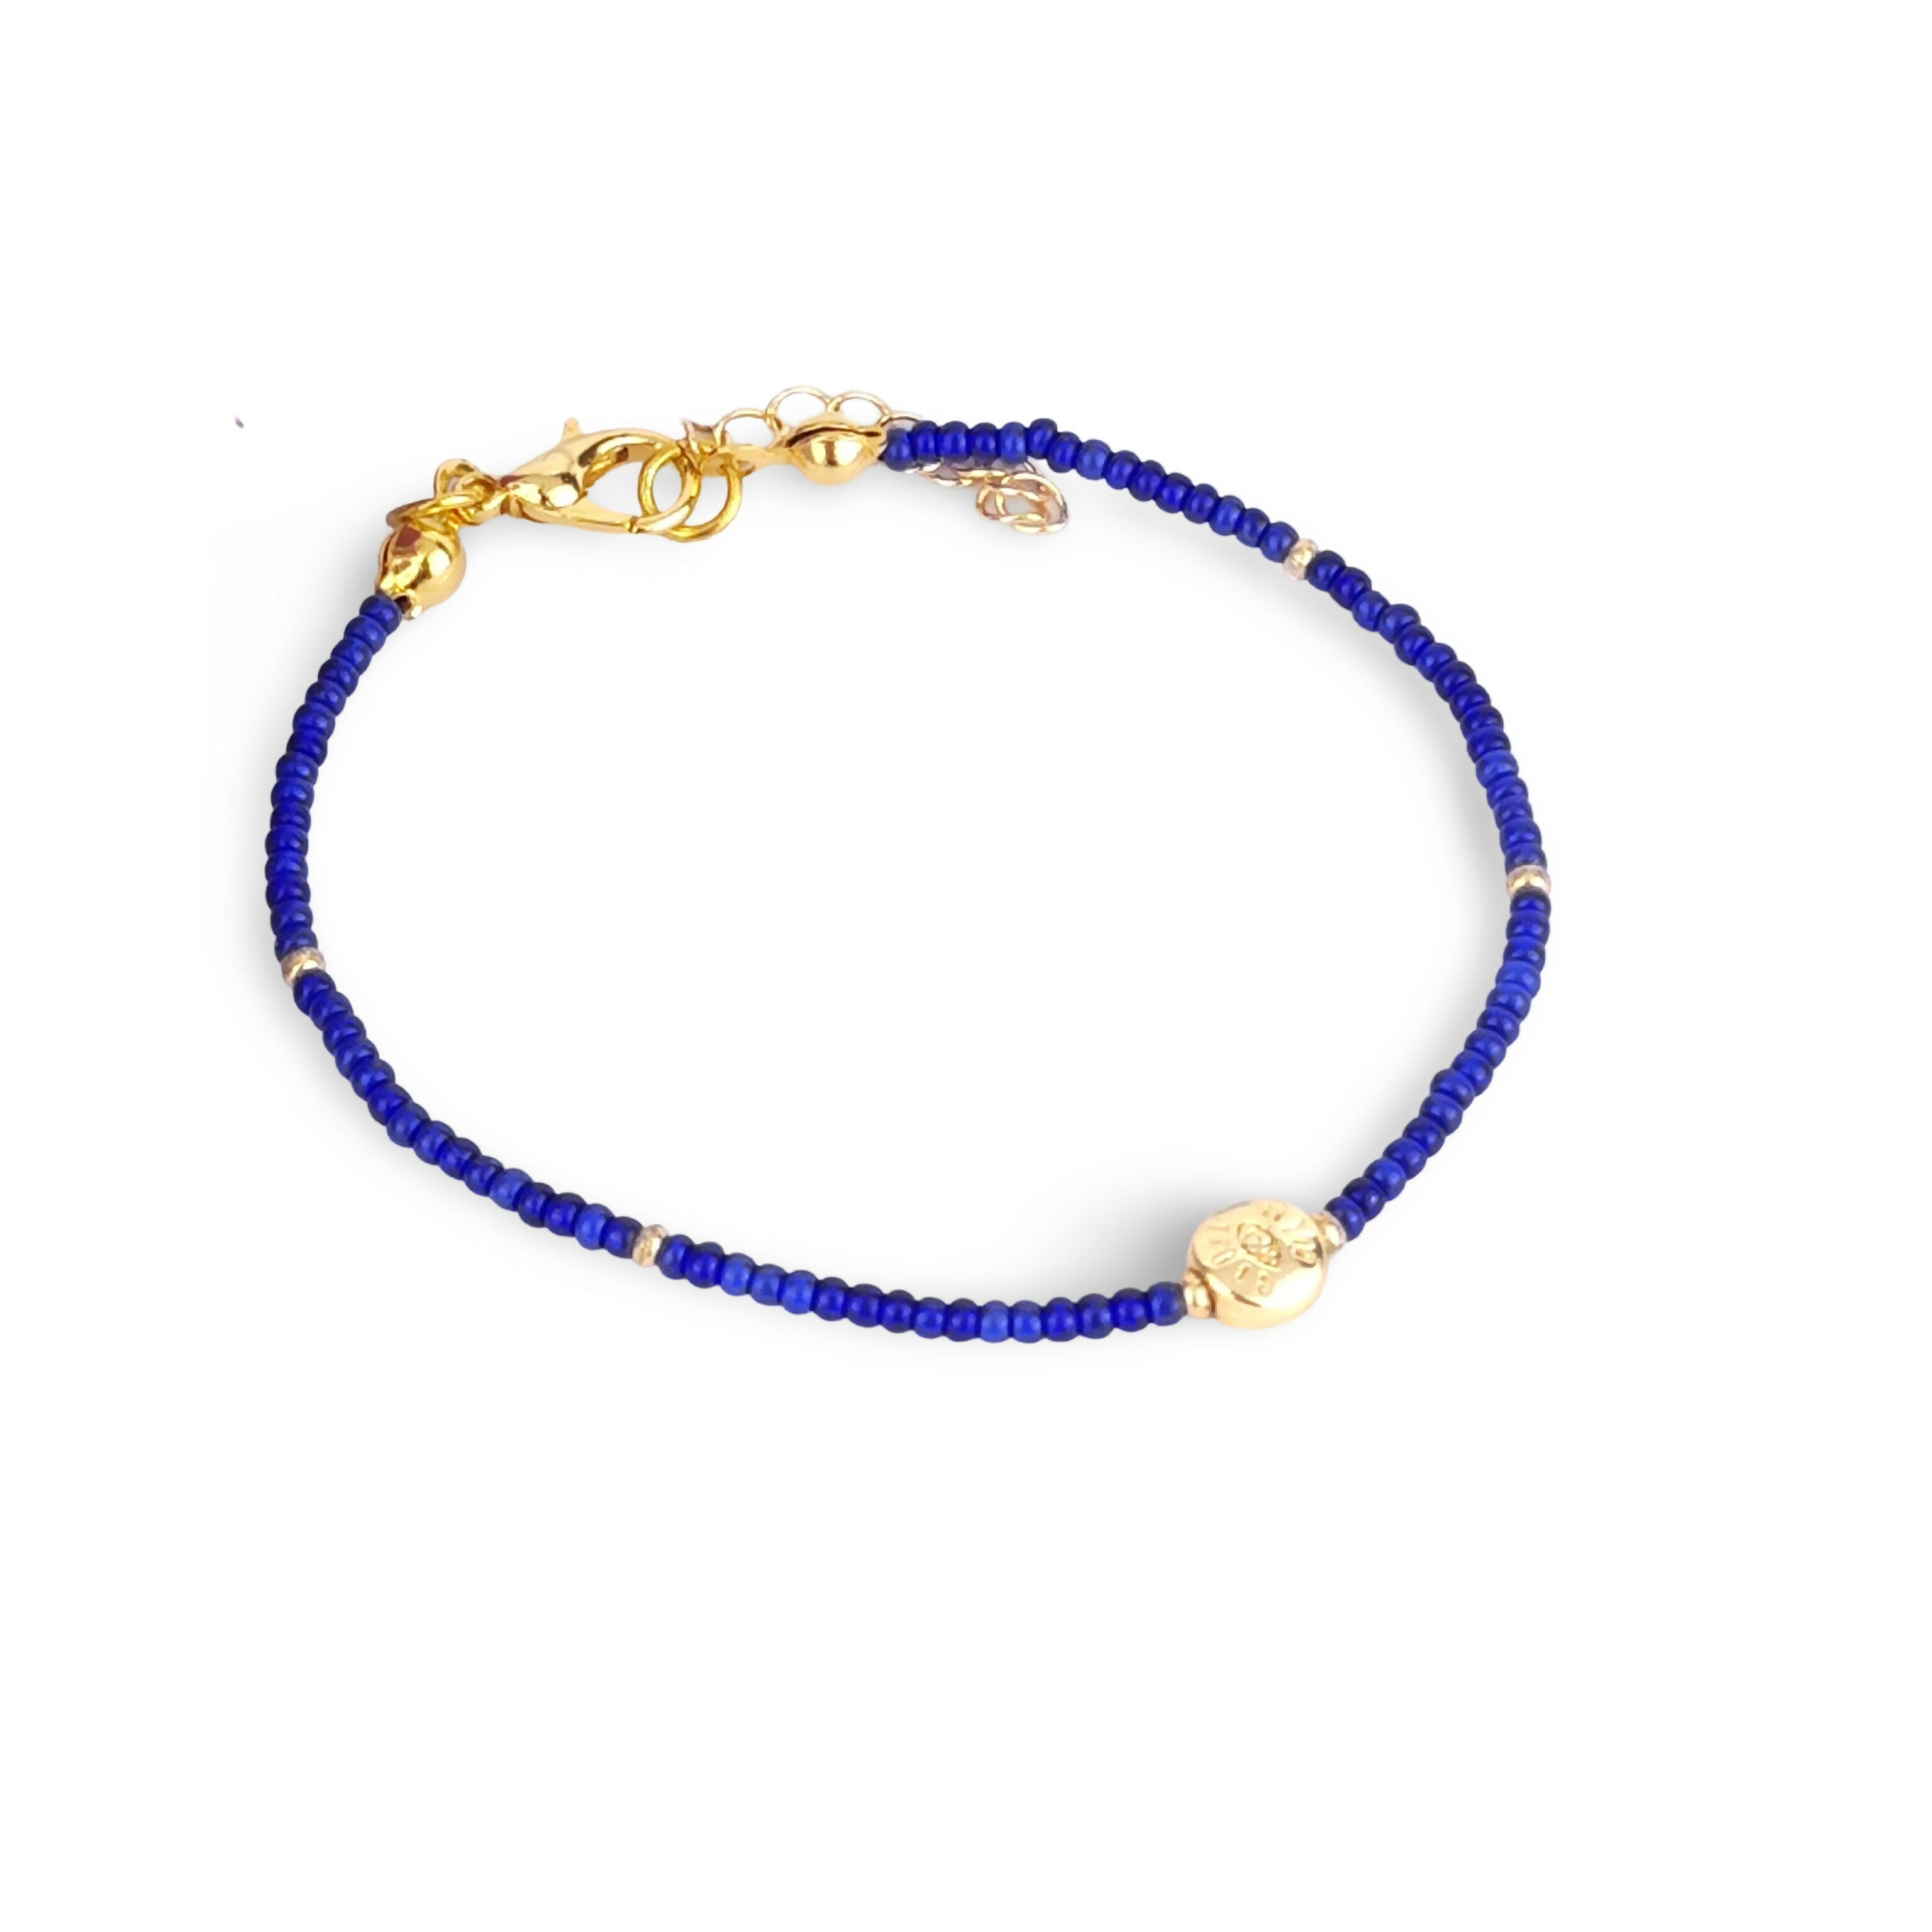 Thin Beaded Bracelet - Gold plated charms